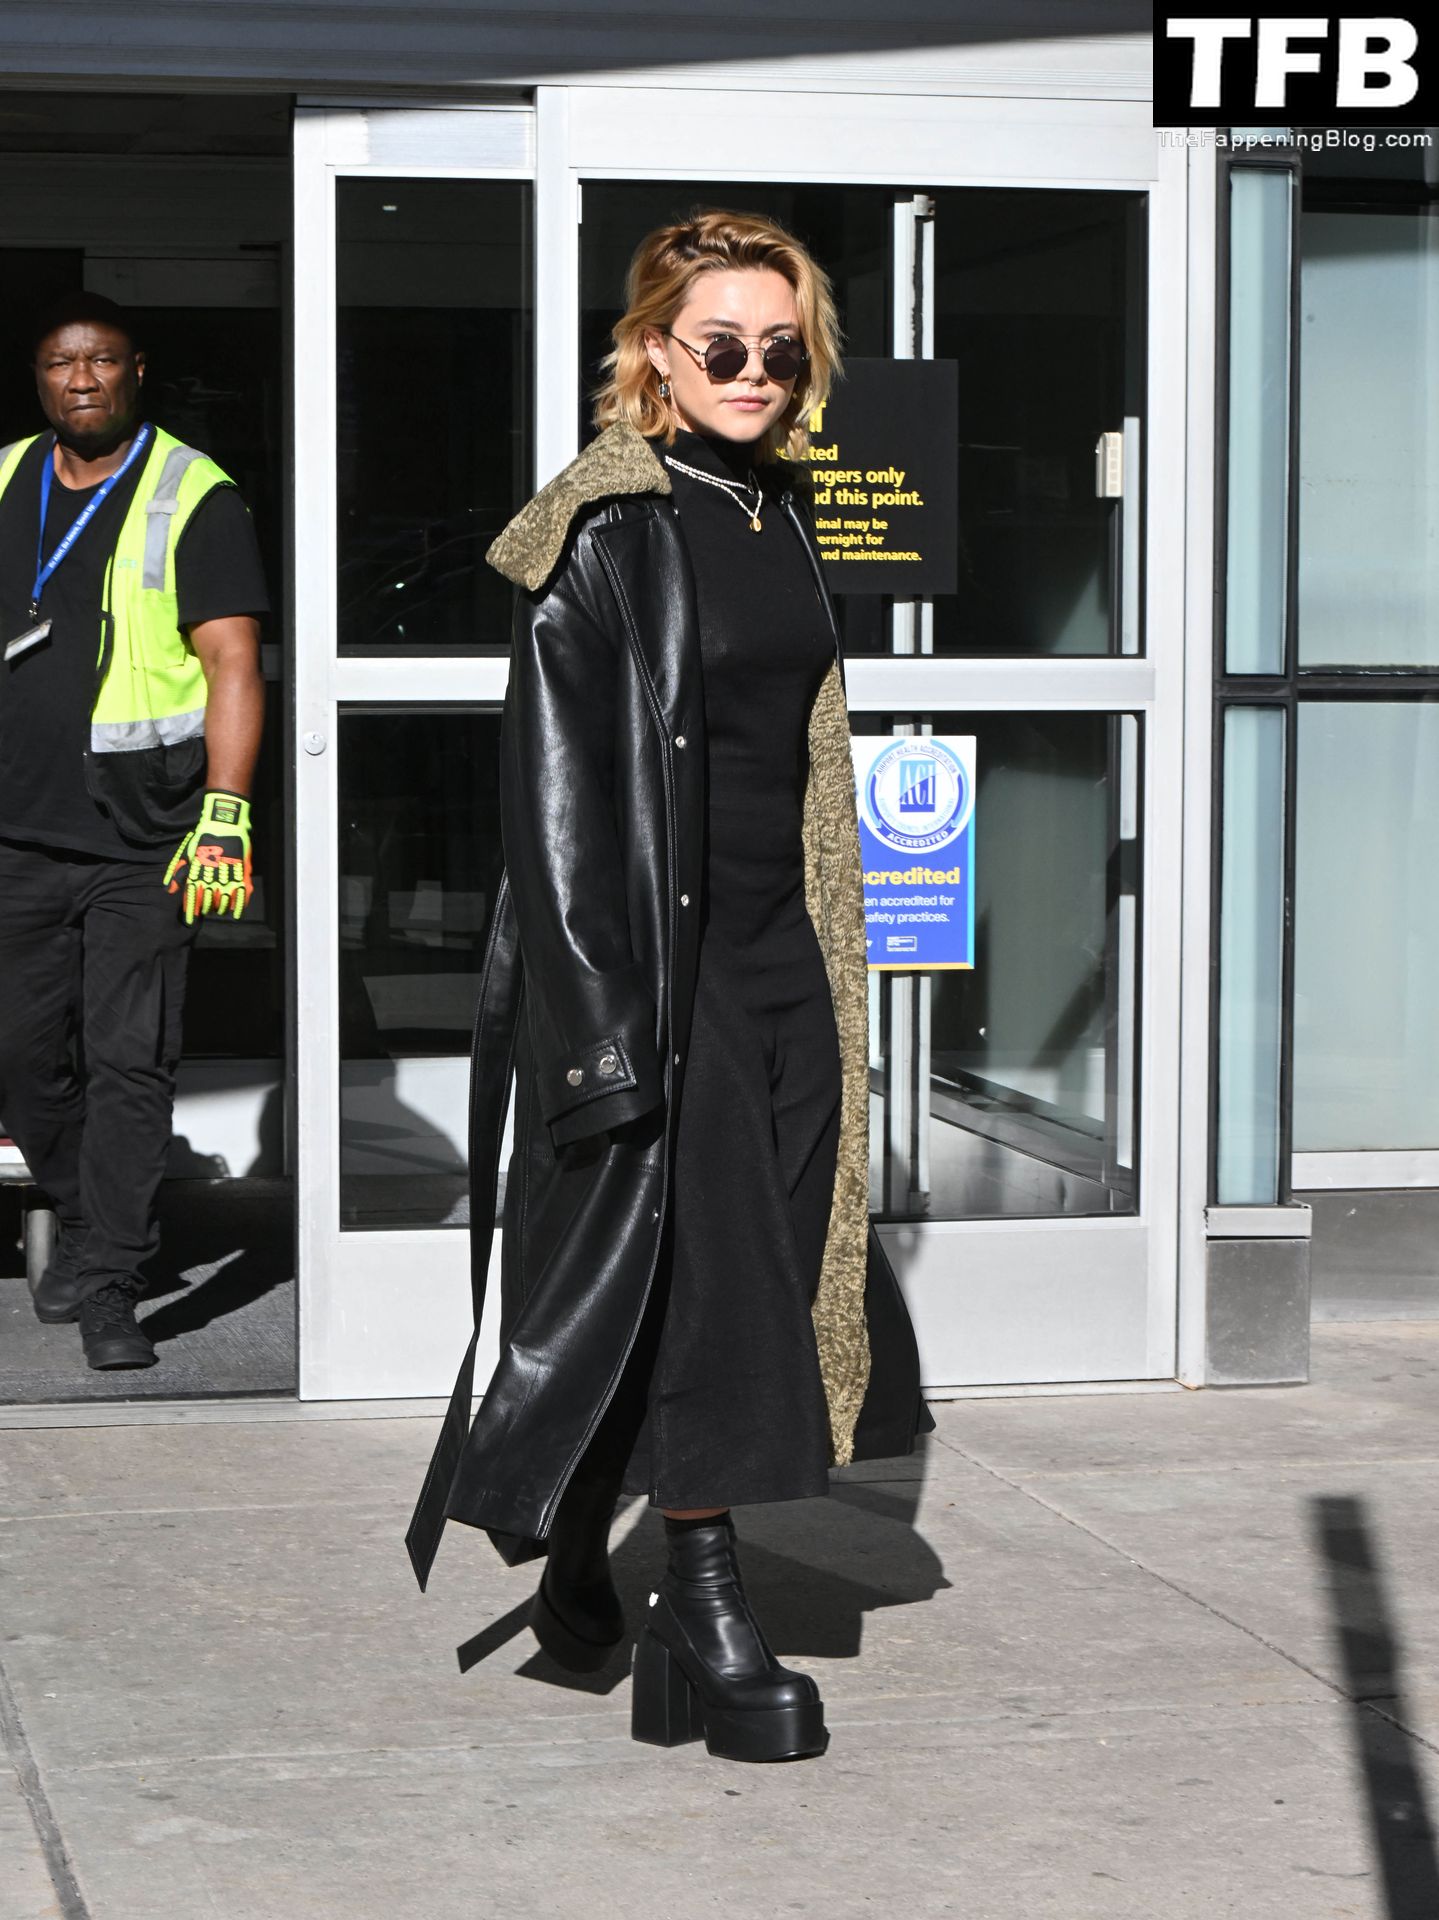 Florence Pugh Pokies The Fappening Blog 3 - Florence Pugh Shows Off Her Pokies at JFK airport in NYC (31 Photos)